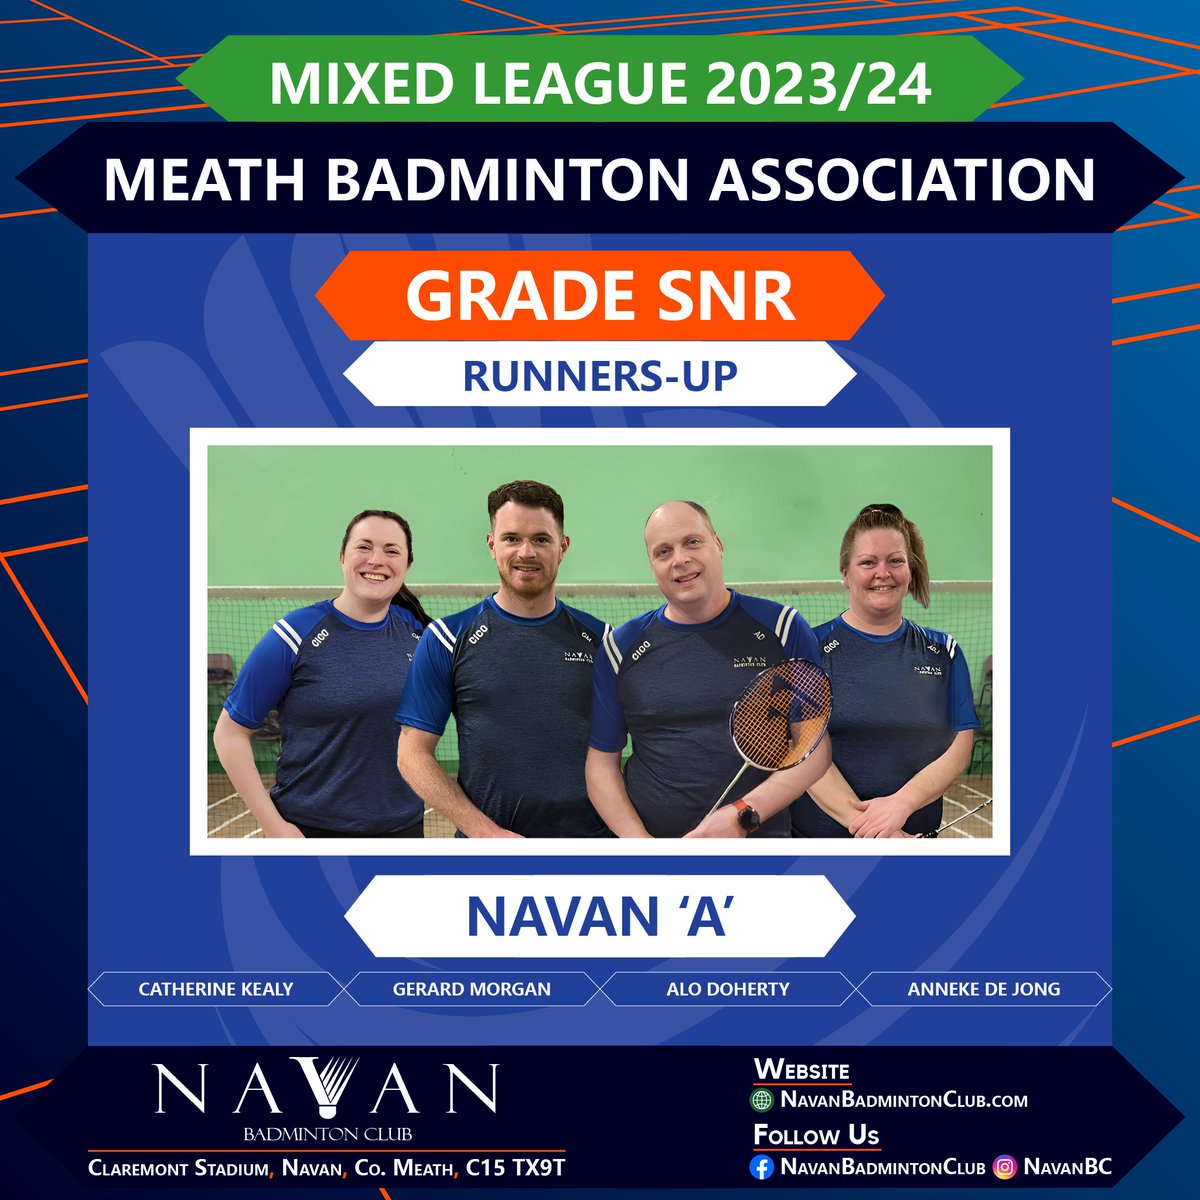 In a hard-fought #Badminton match, our #Navan Grade Snr Mixed 'A' unfortunately fell short in the #final v Athboy/Kells last night. #Congratulations to Athboy/Kells on their #victory, well done!

#BWFWorldTour #YAE24 #AllOfBadminton #AllEngland2024 #FrenchOpen2024
#Meath #Ireland